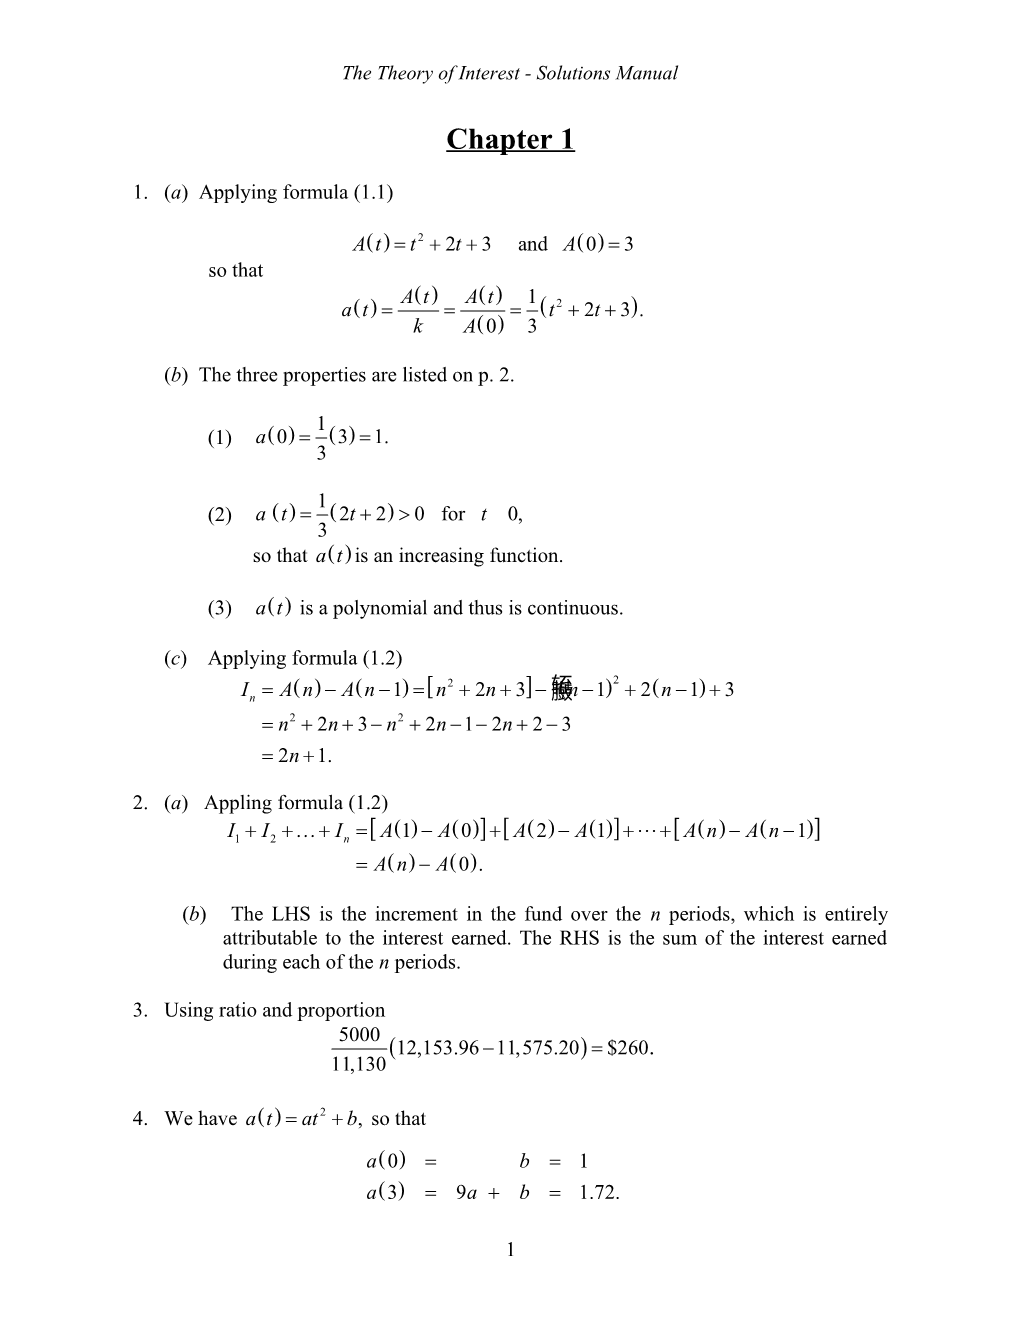 The Theory of Interest - Solutions Manual Chapter 1